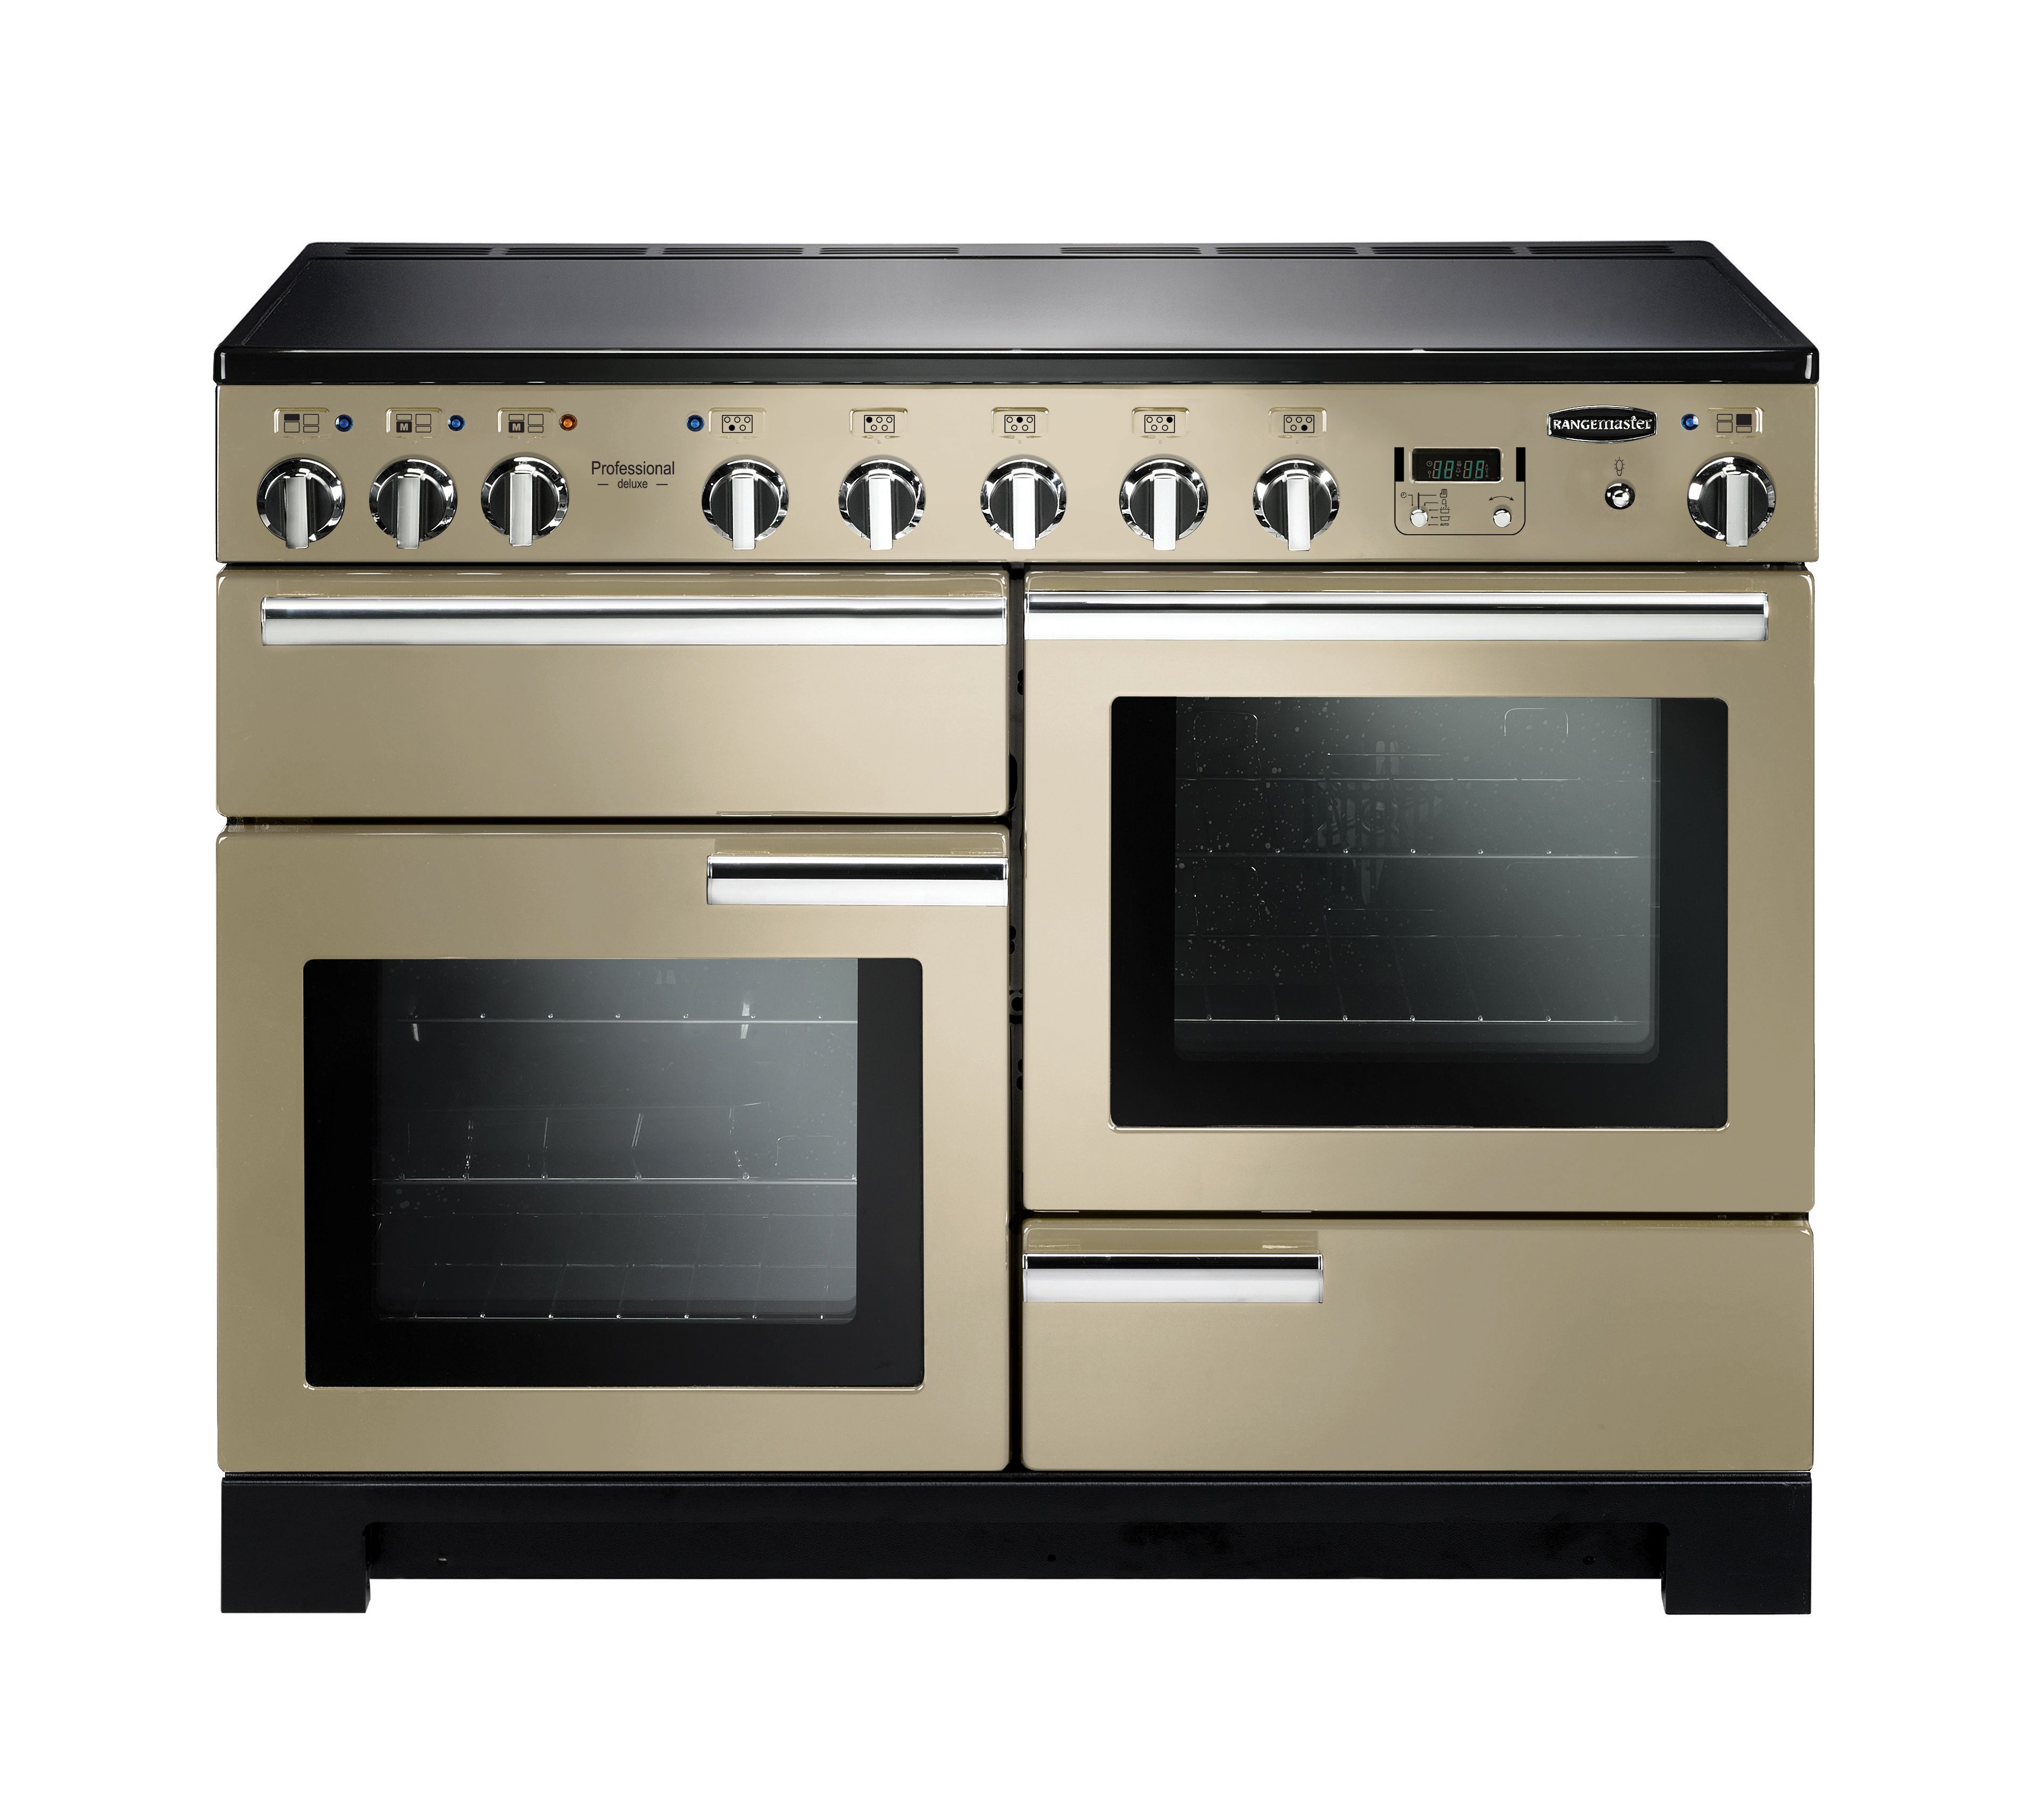 Rangemaster Professional Deluxe PDL110EICR/C 110cm Electric Range Cooker with Induction Hob - Cream / Chrome - A/A Rated, Cream